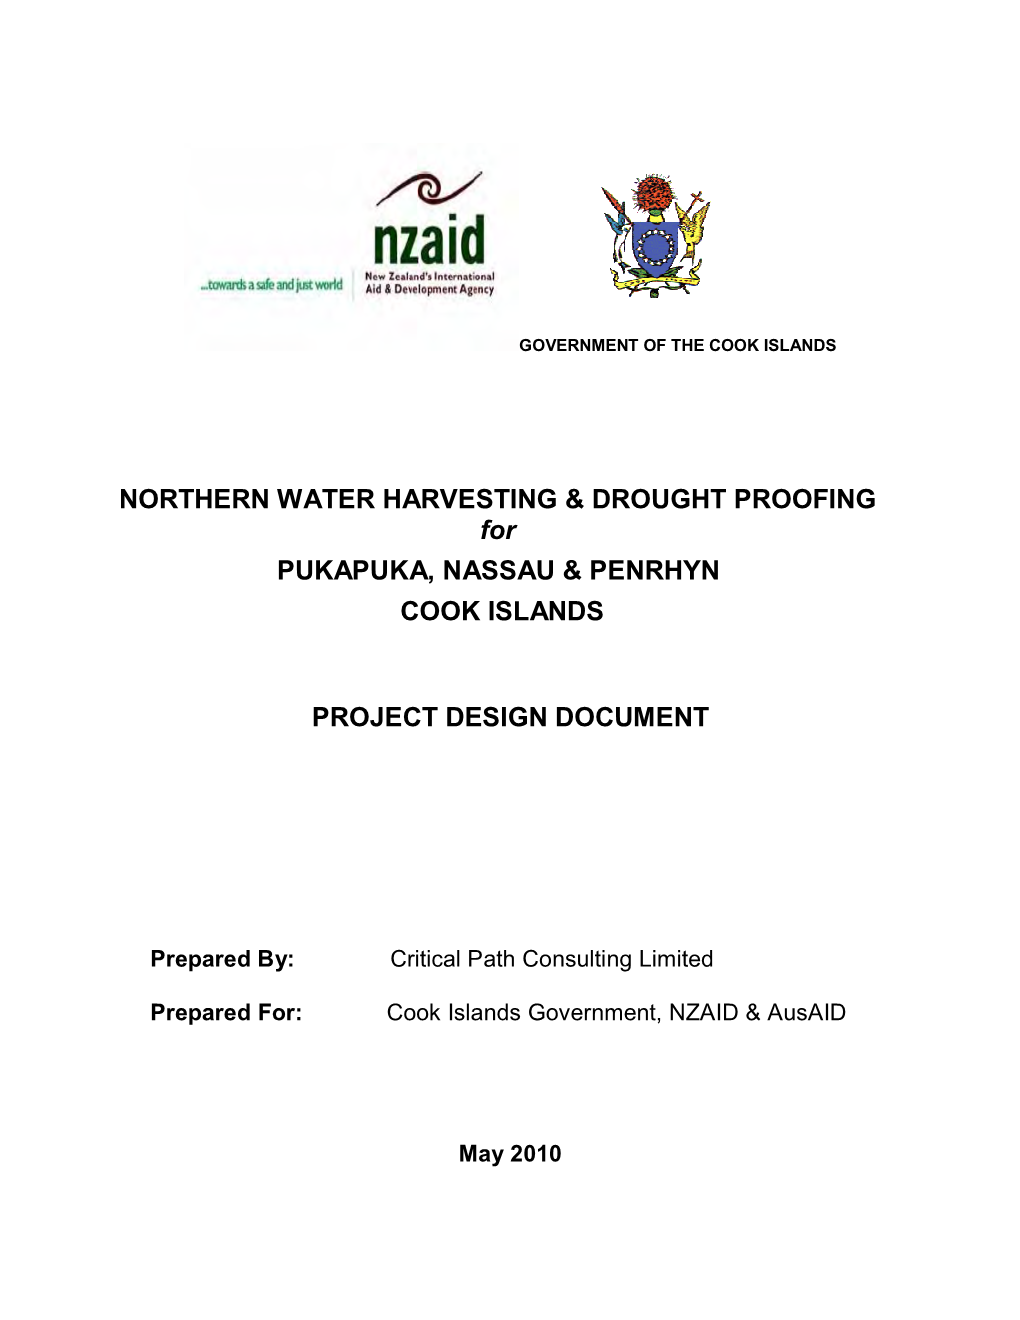 NORTHERN WATER HARVESTING & DROUGHT PROOFING for PUKAPUKA, NASSAU & PENRHYN COOK ISLANDS PROJECT DESIGN DOCUMENT